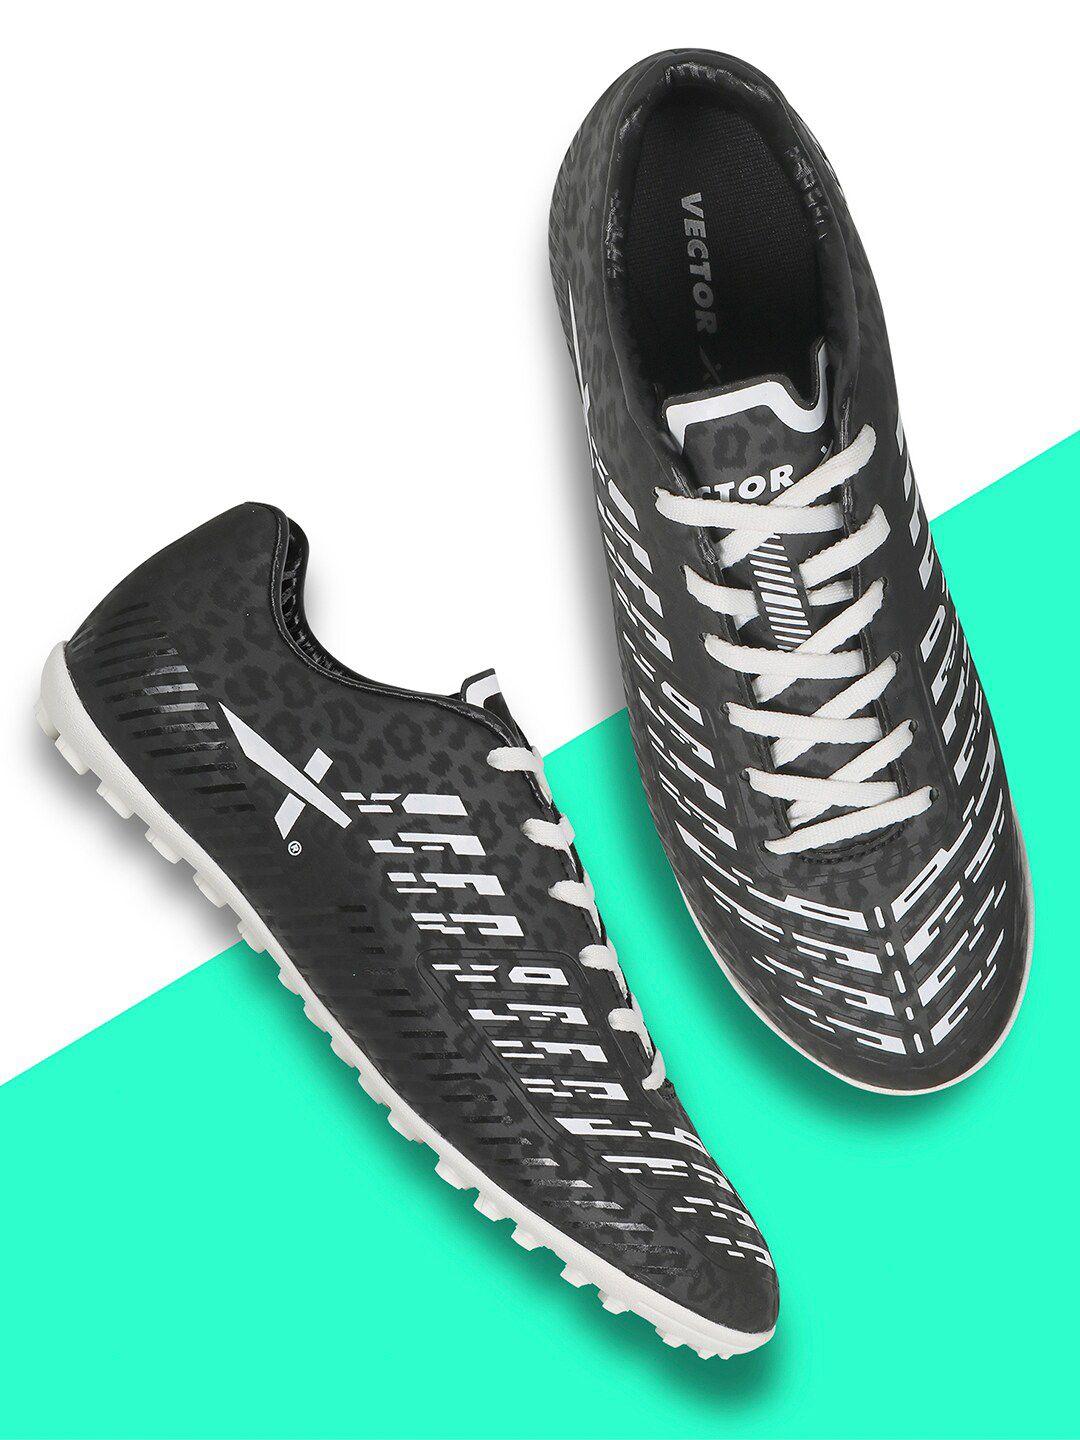 vector x unisex dynamite football shoes